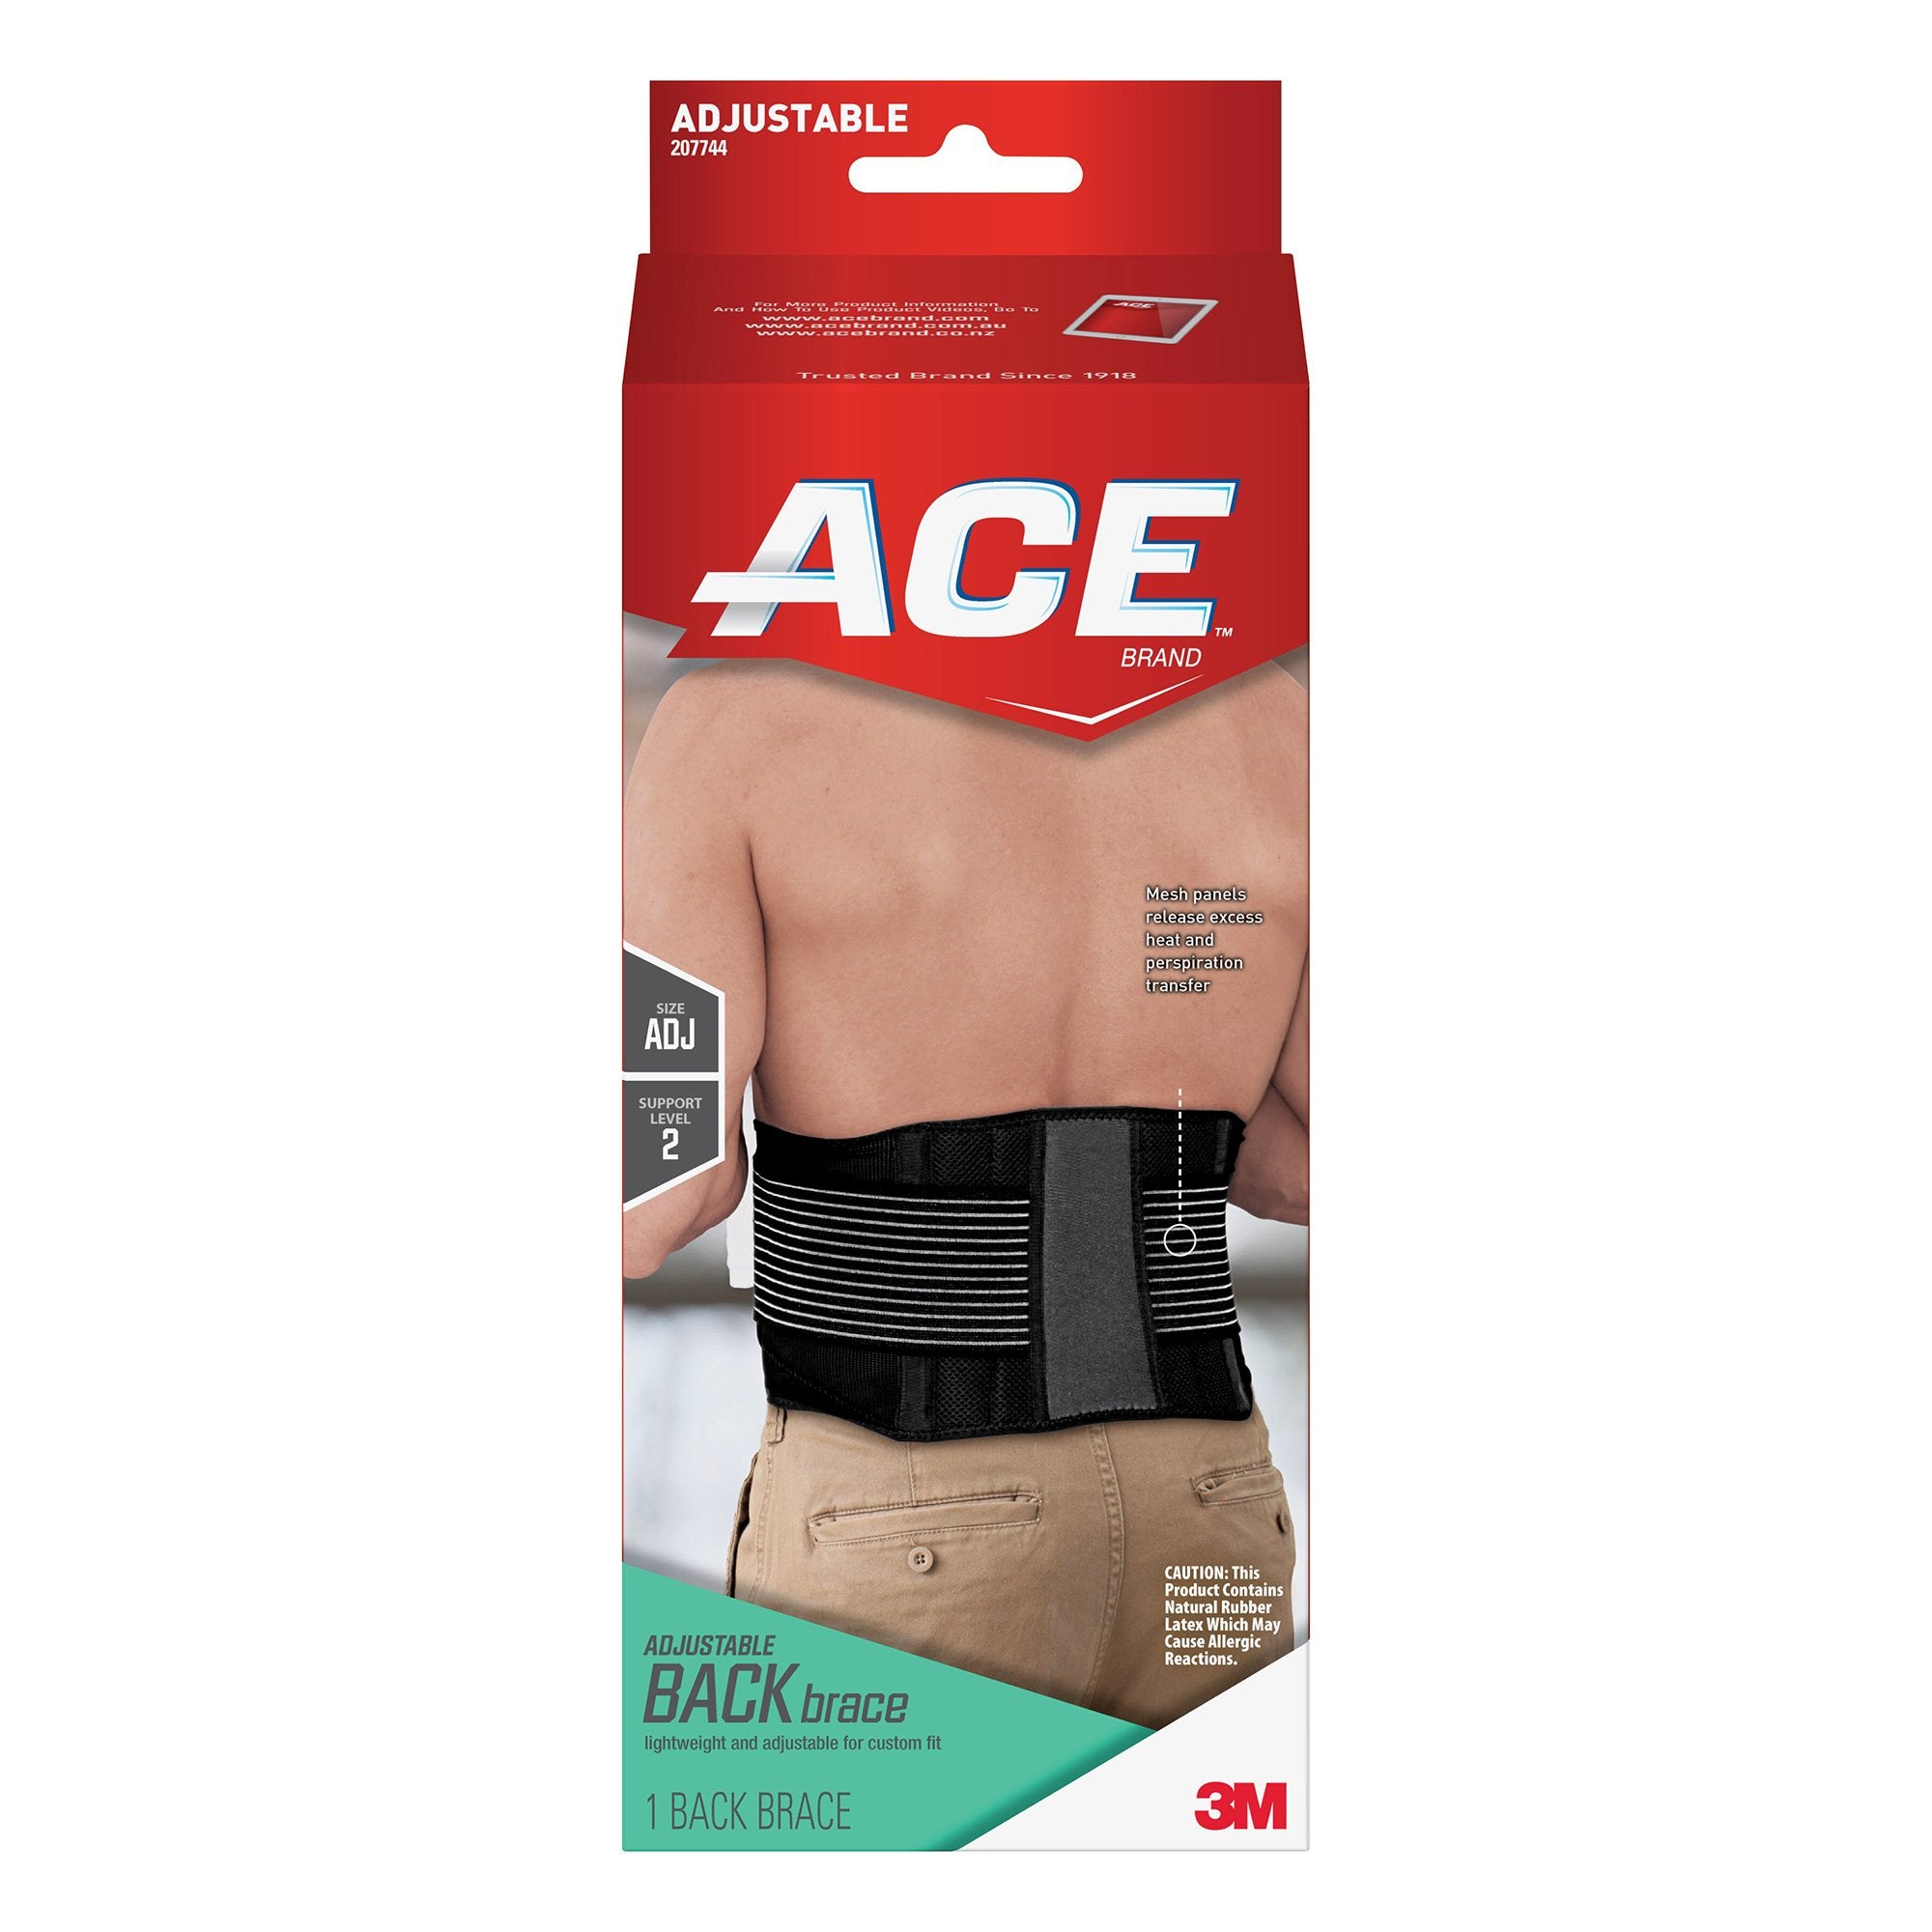 Back Support Ace One Size Fits Most Hook and Loop Closure Up to 48 Inch Waist Circumference Adult